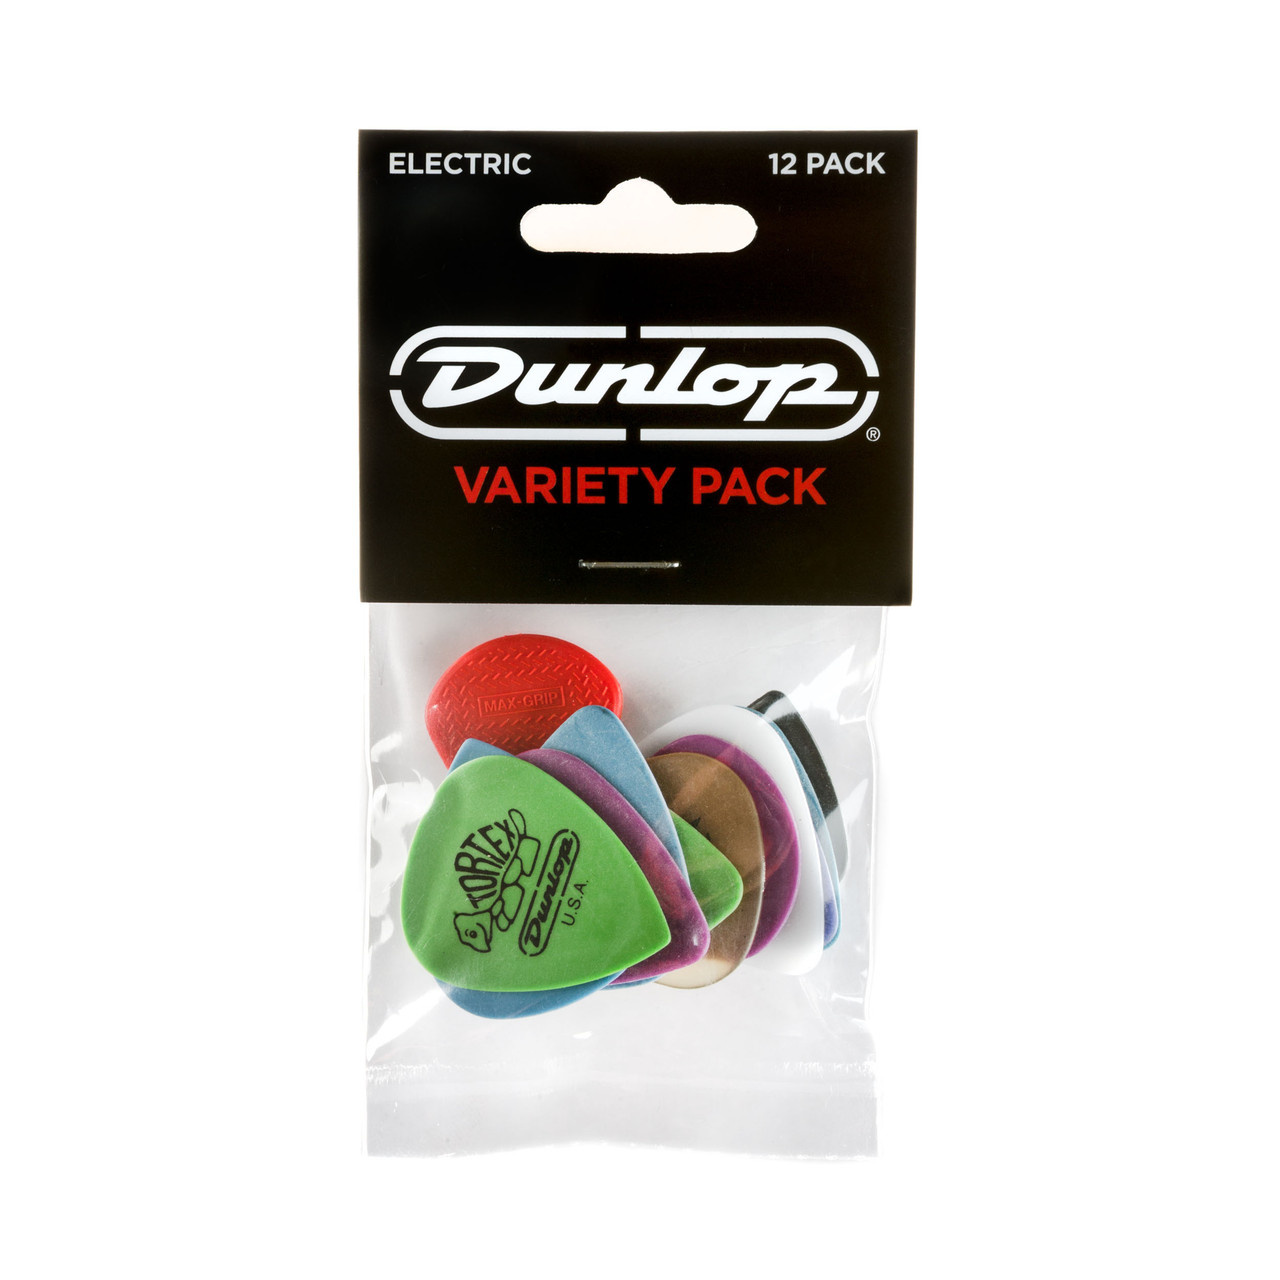 Dunlop Electric Guitar Pick Variety 12-Pack-1